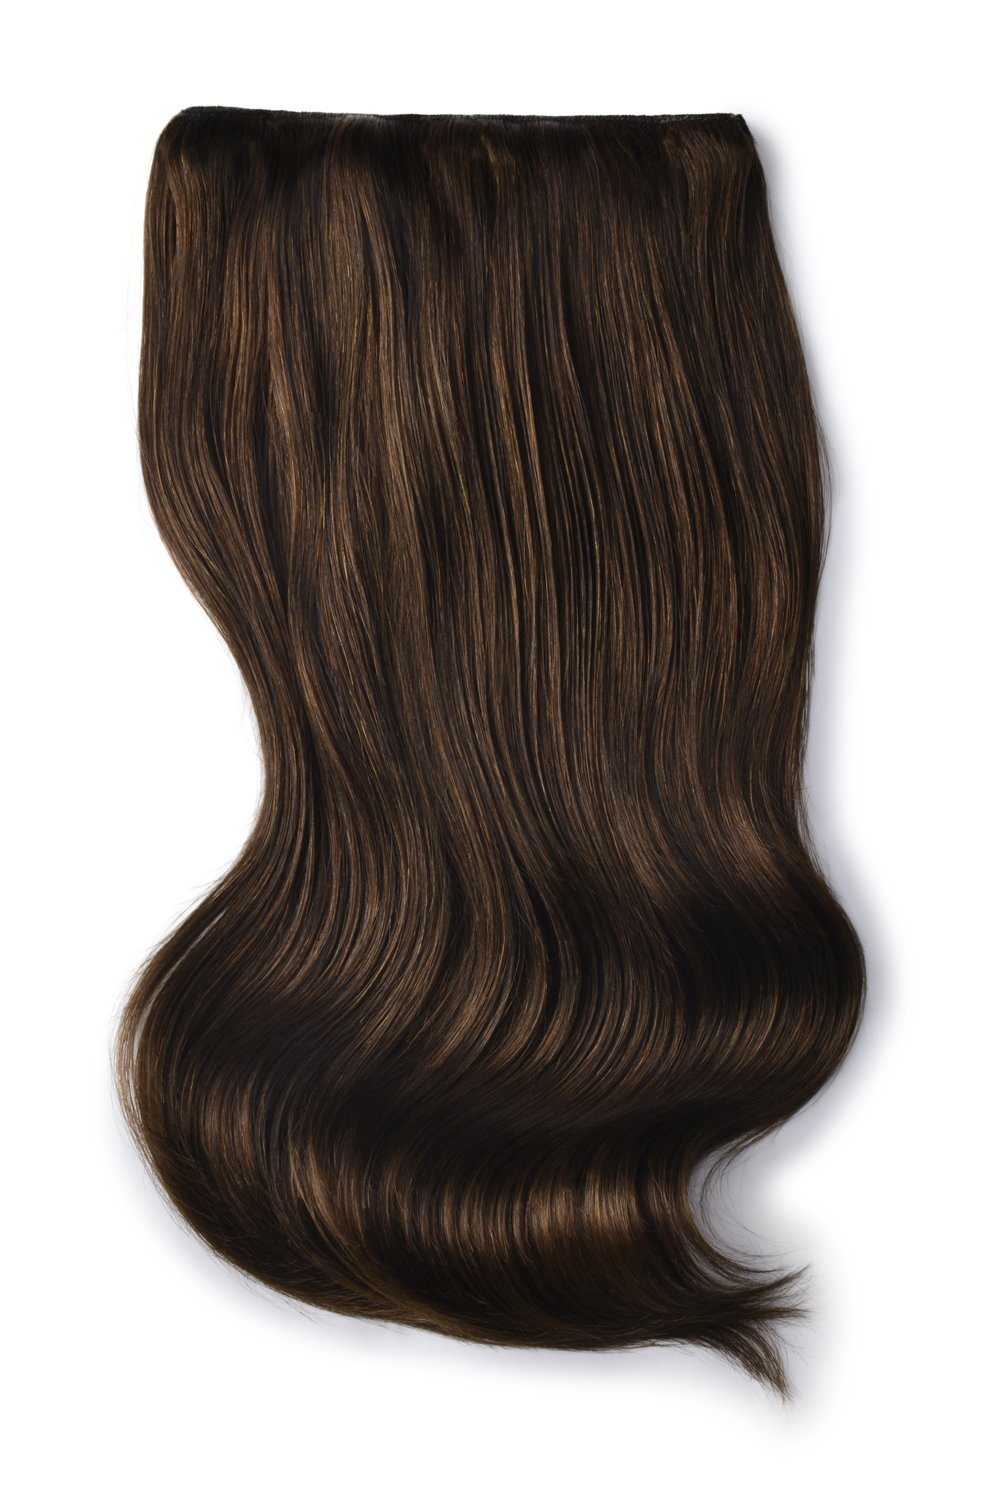 Hair Extensions by Cliphair UK - Medium Brown Extra Thick Extensions